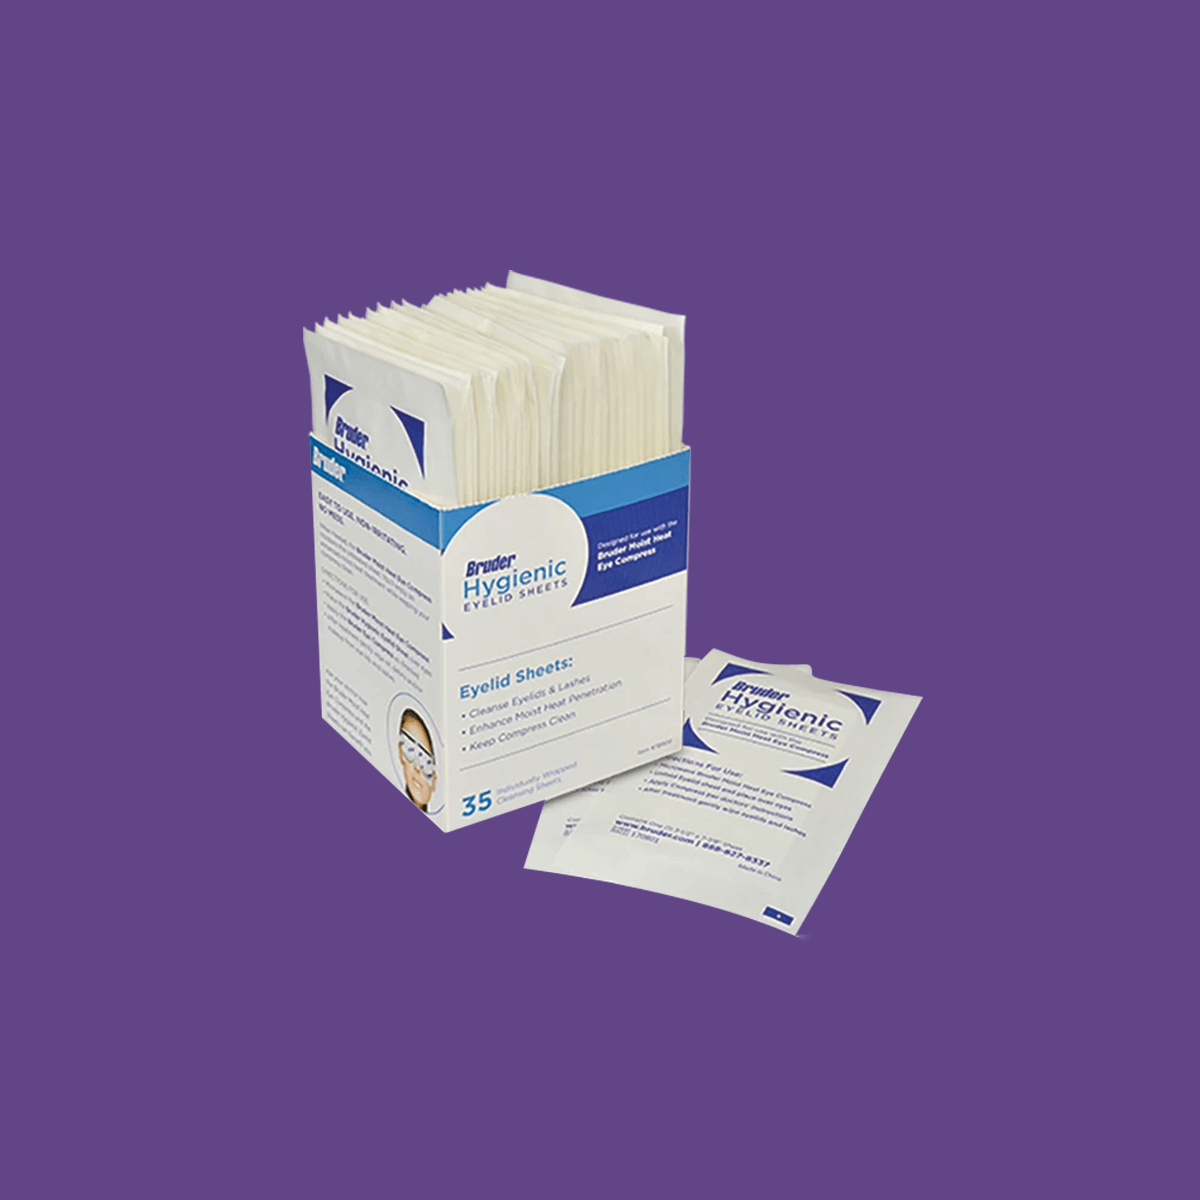 Bruder Hygienic Eyelid Sheets 35 Count Box (Used with Bruder Mask) - DryEye Rescue Store